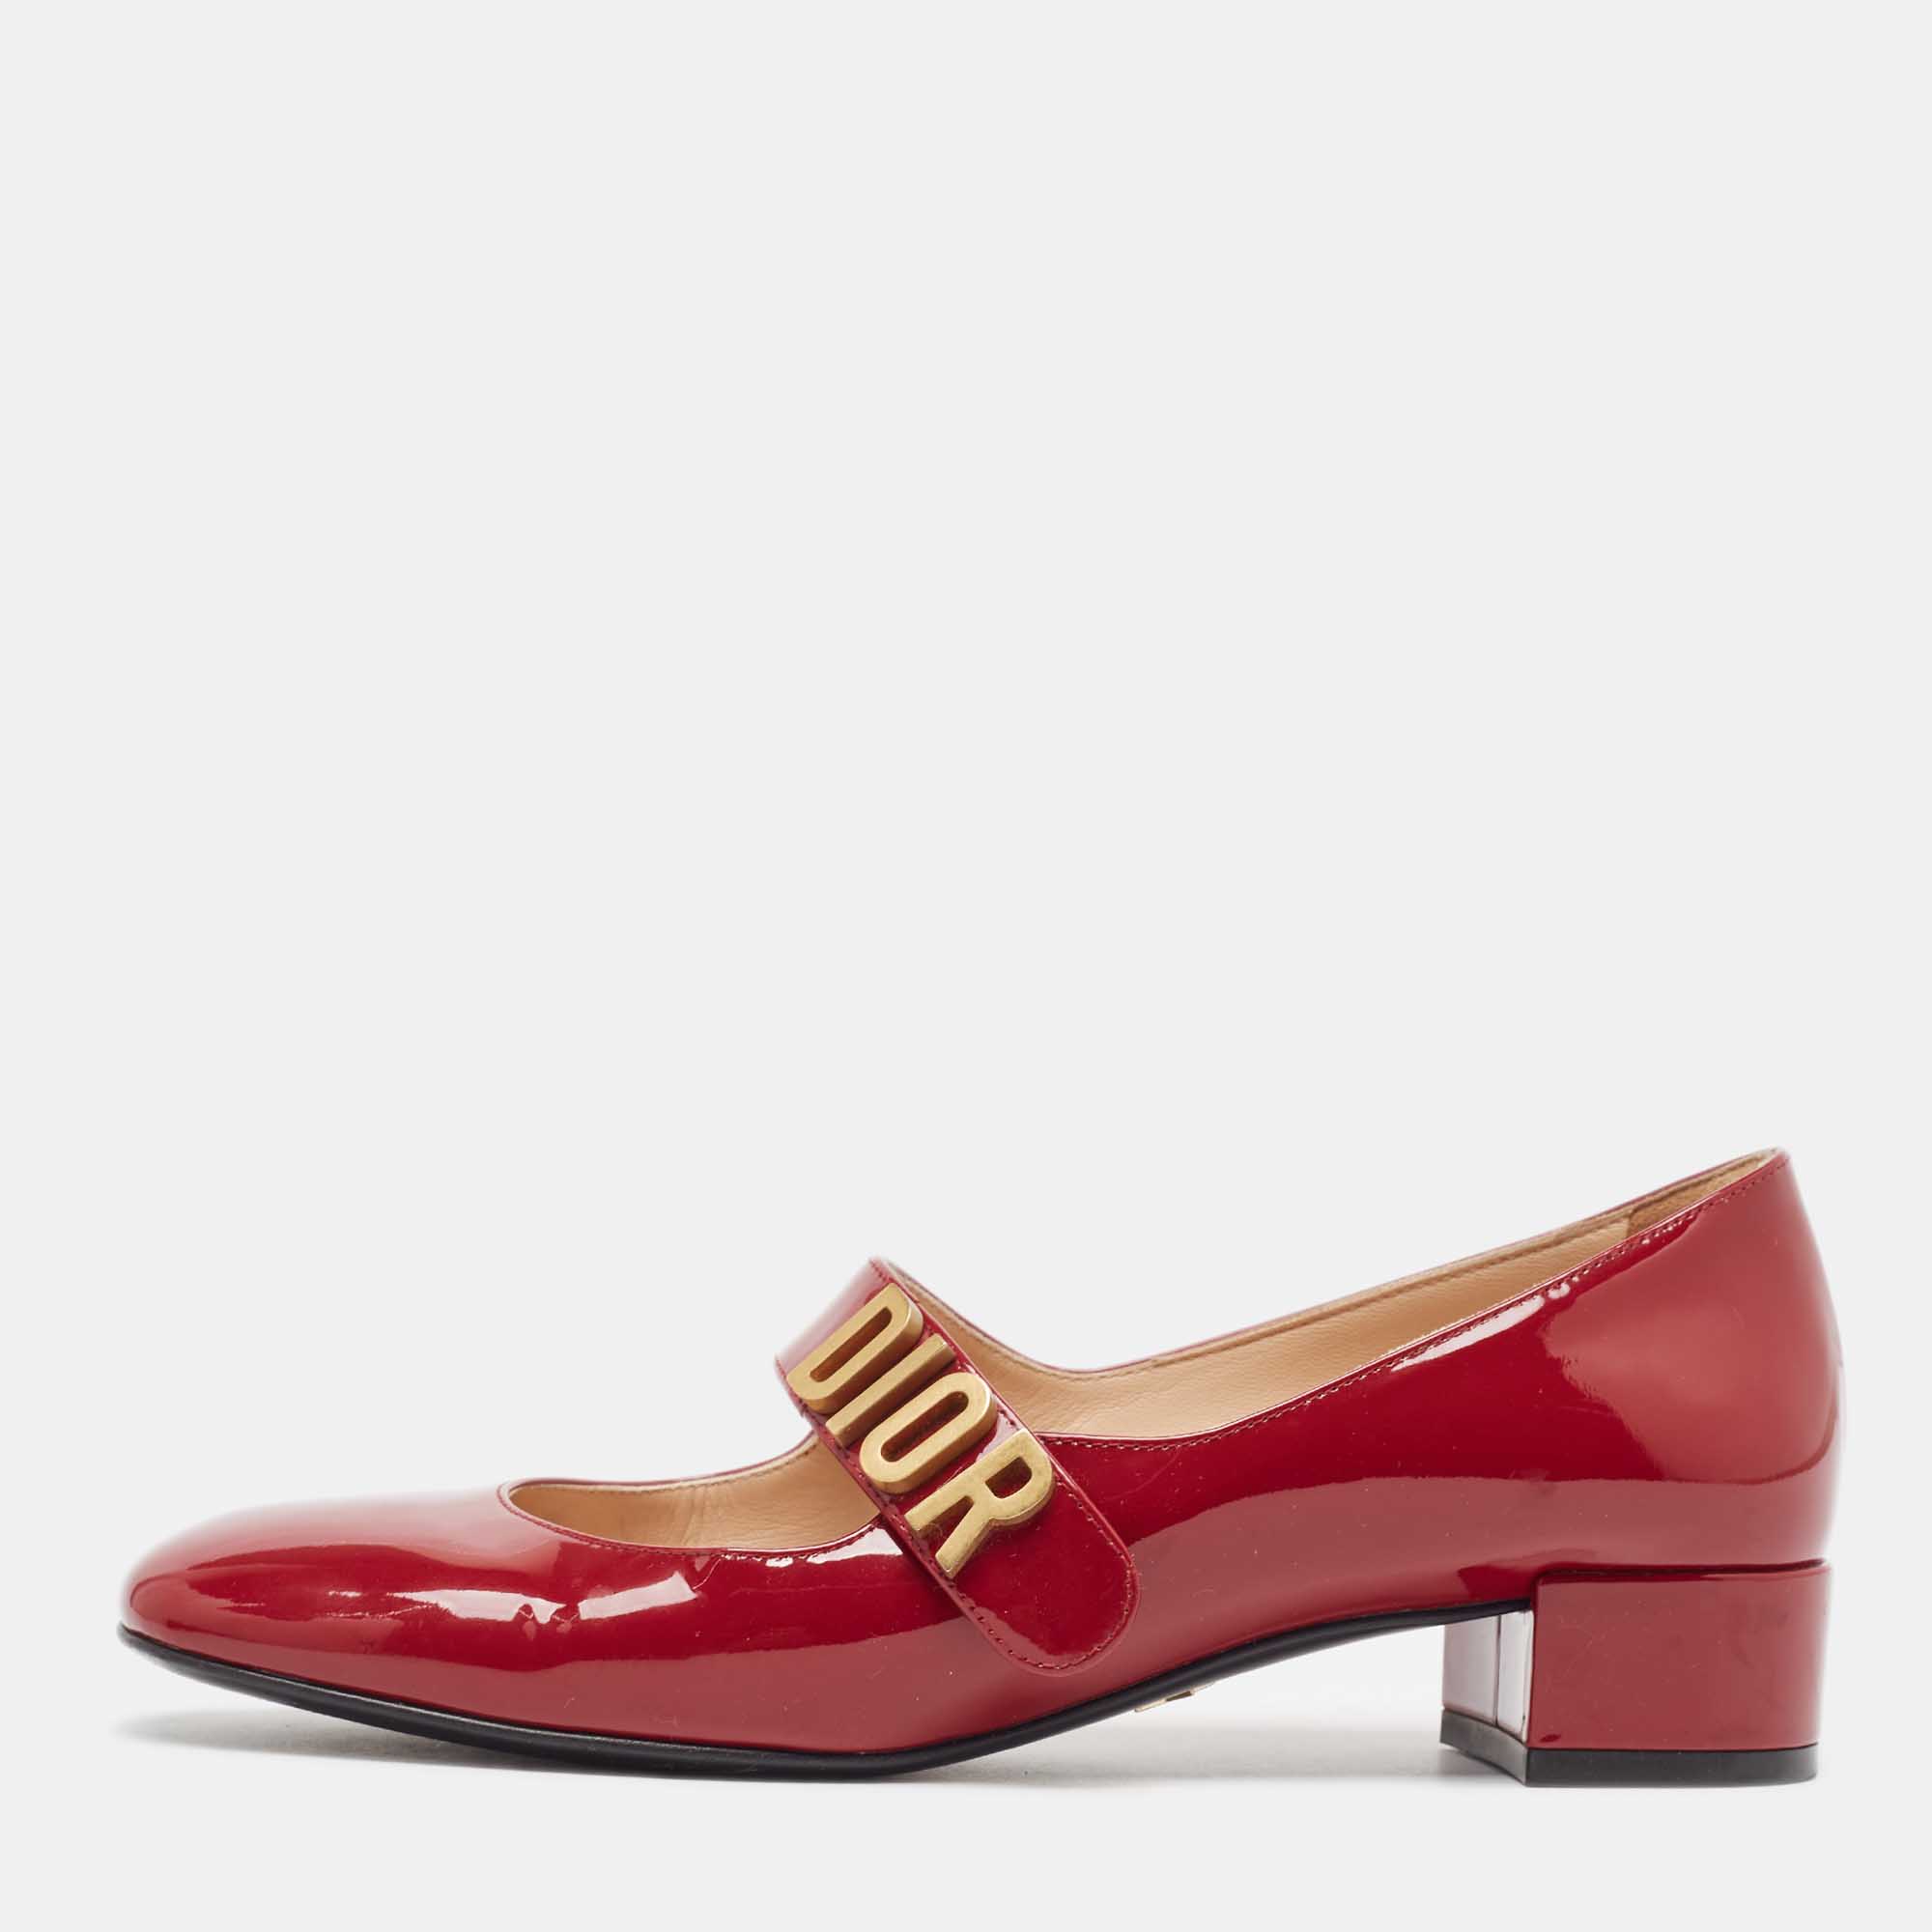 Dior burgundy patent leather baby-d mary jane pumps size 36